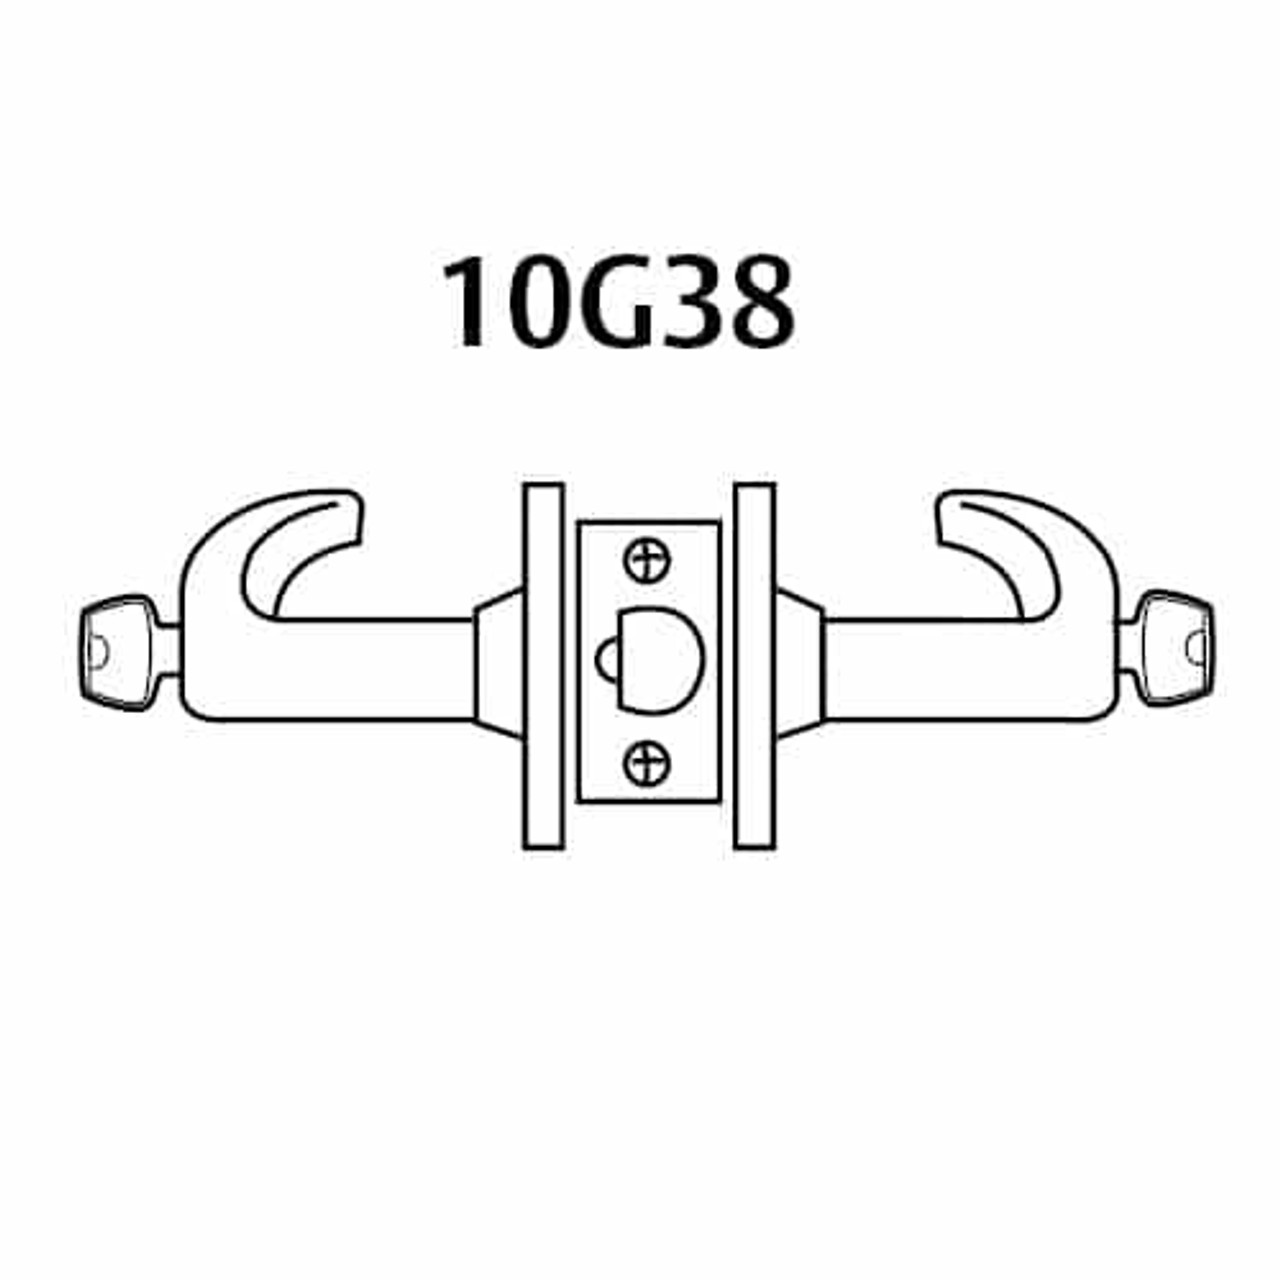 2860-10G38-GL-26D Sargent 10 Line Cylindrical Classroom Locks with L Lever Design and G Rose Prepped for LFIC in Satin Chrome